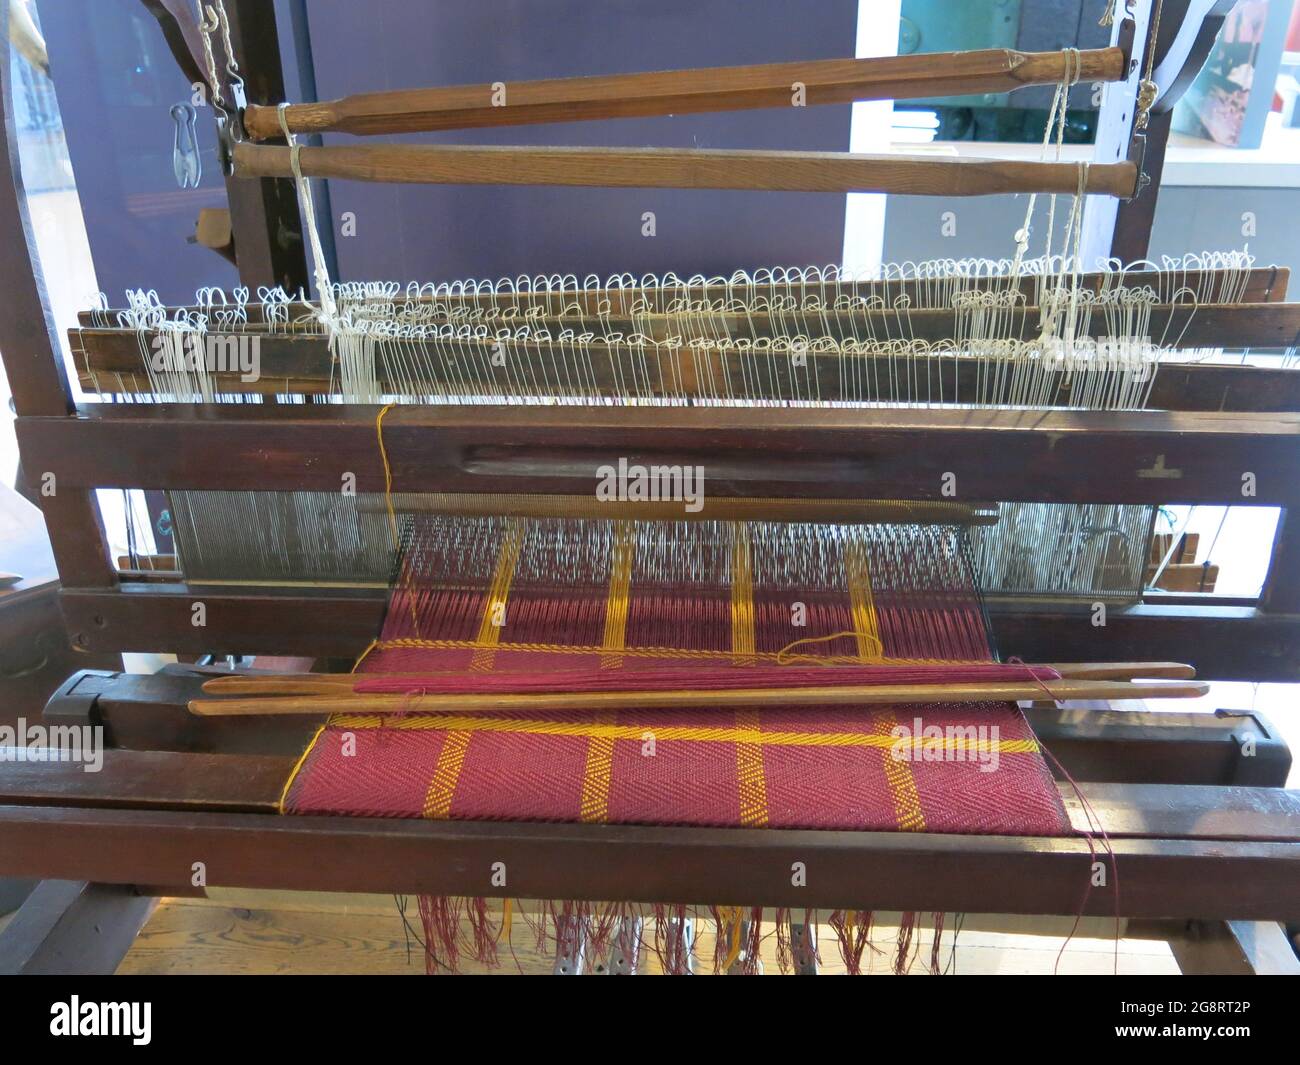 Weaving was one of the earliest industries in Lanarkshire; a loom is on display at the Summerlee Museum of Scottish Industrial Heritage. Stock Photo